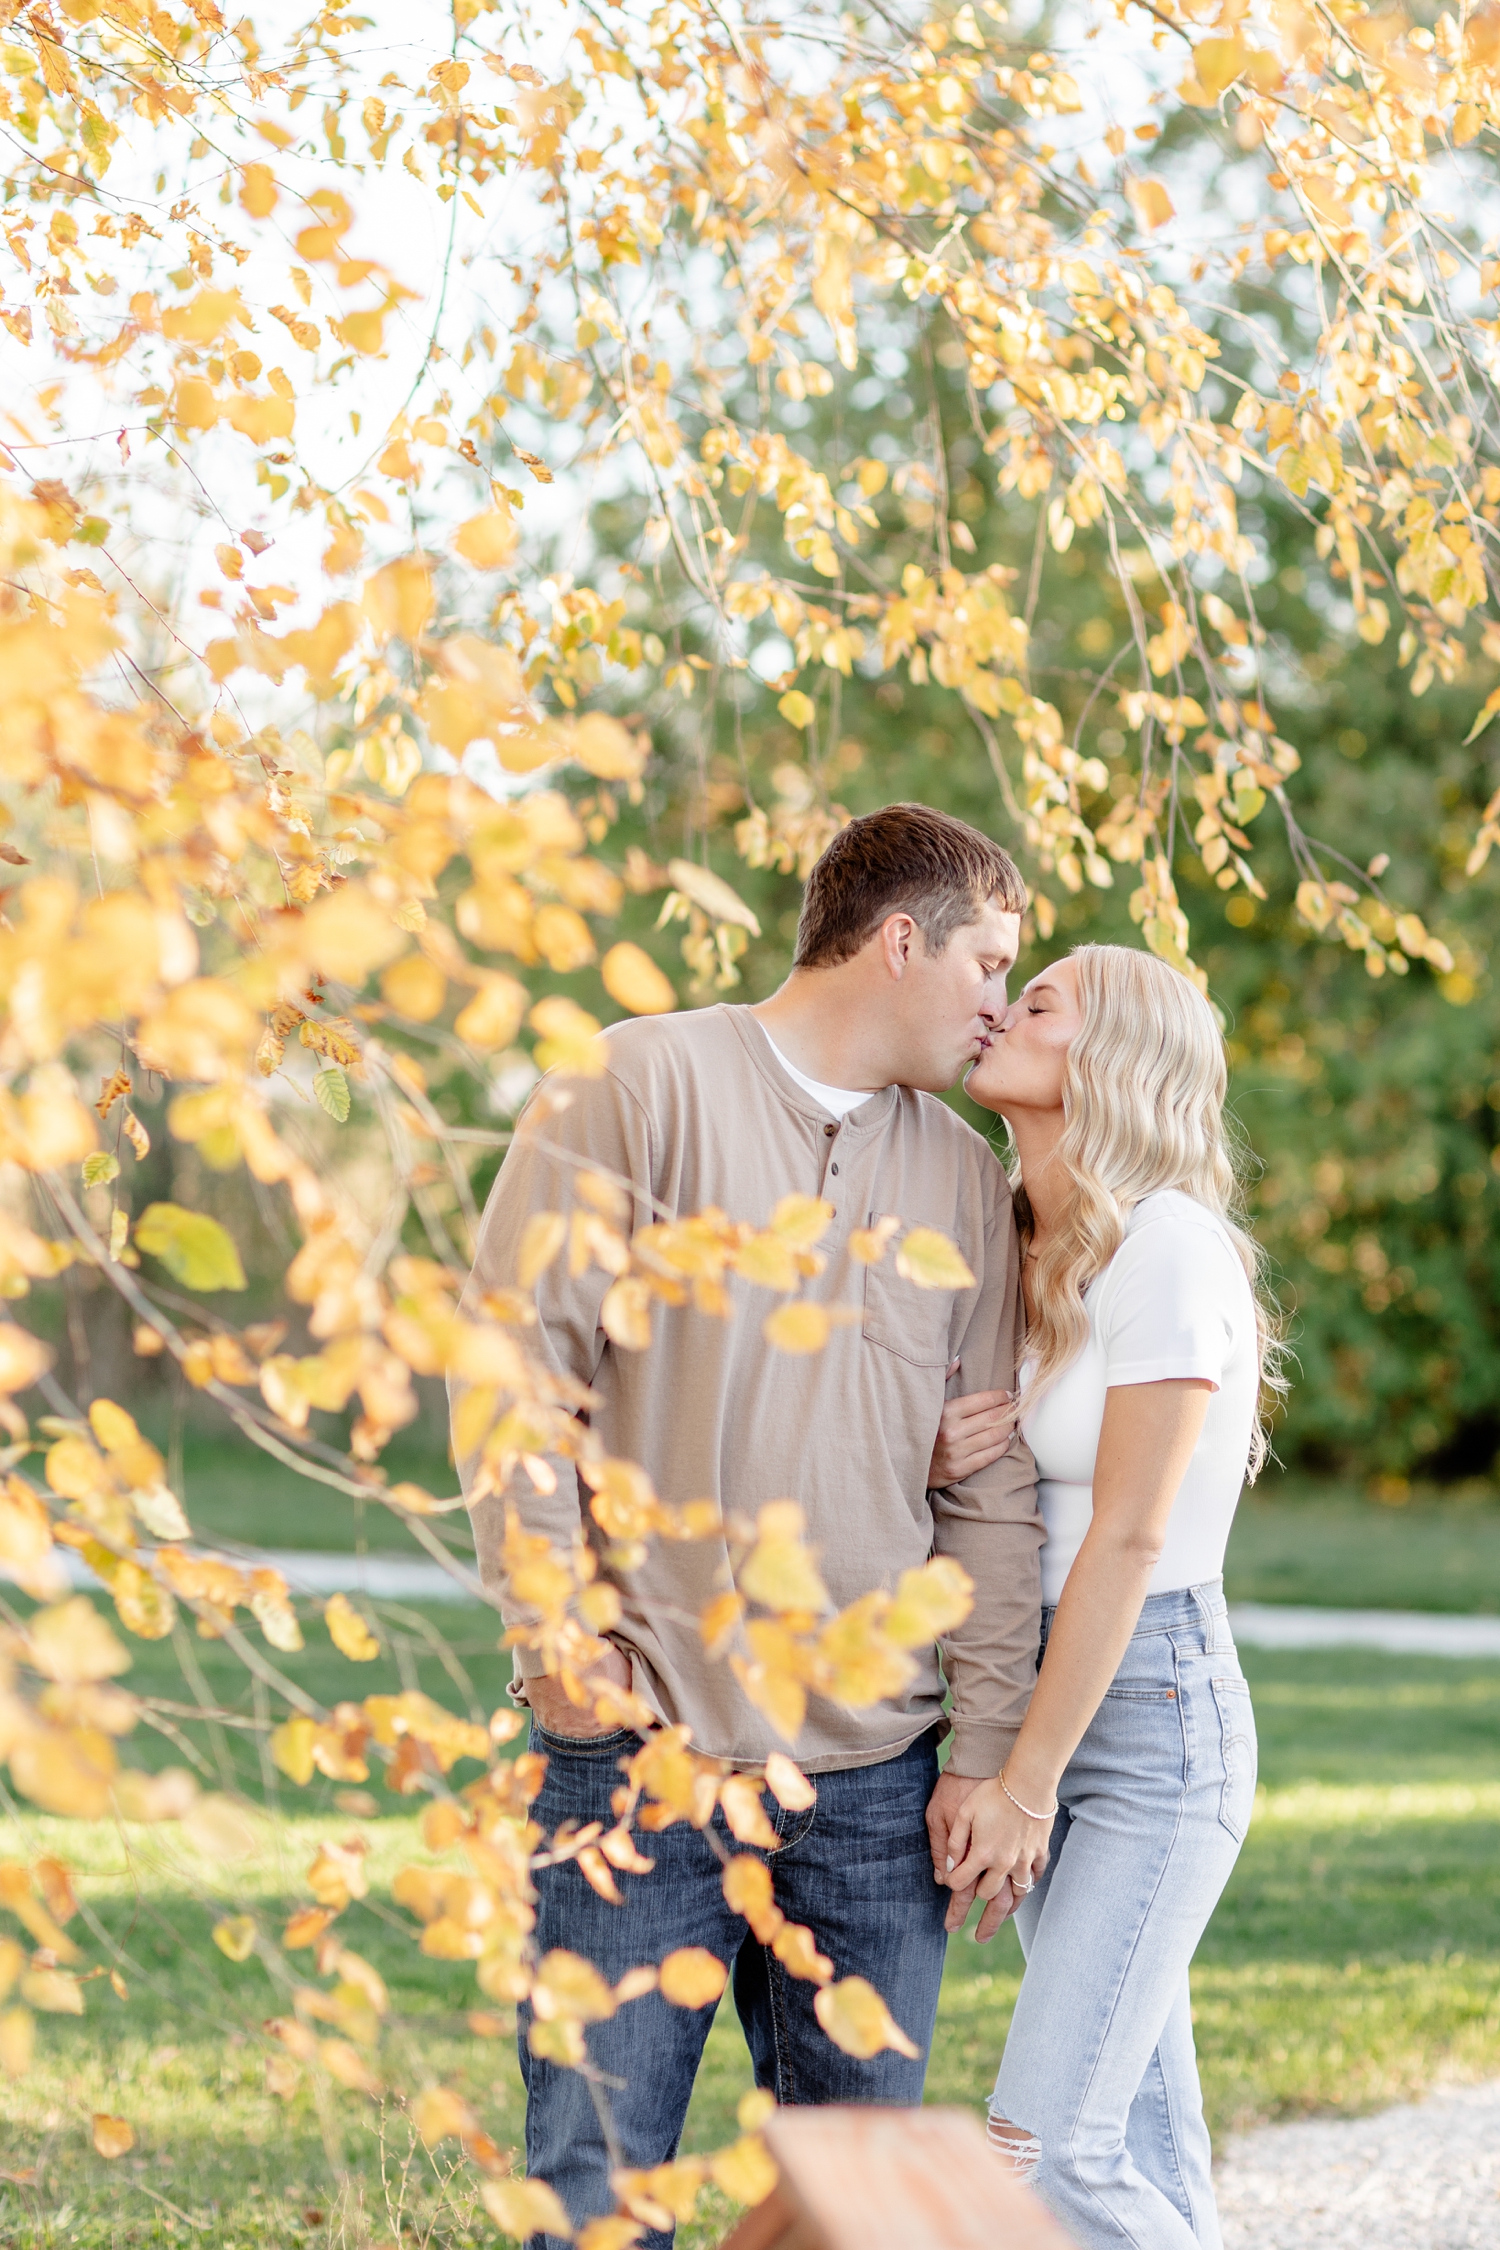 Reed and Nicole share a kiss as they are surrounded by yellow and orange birch leaves | CB Studio